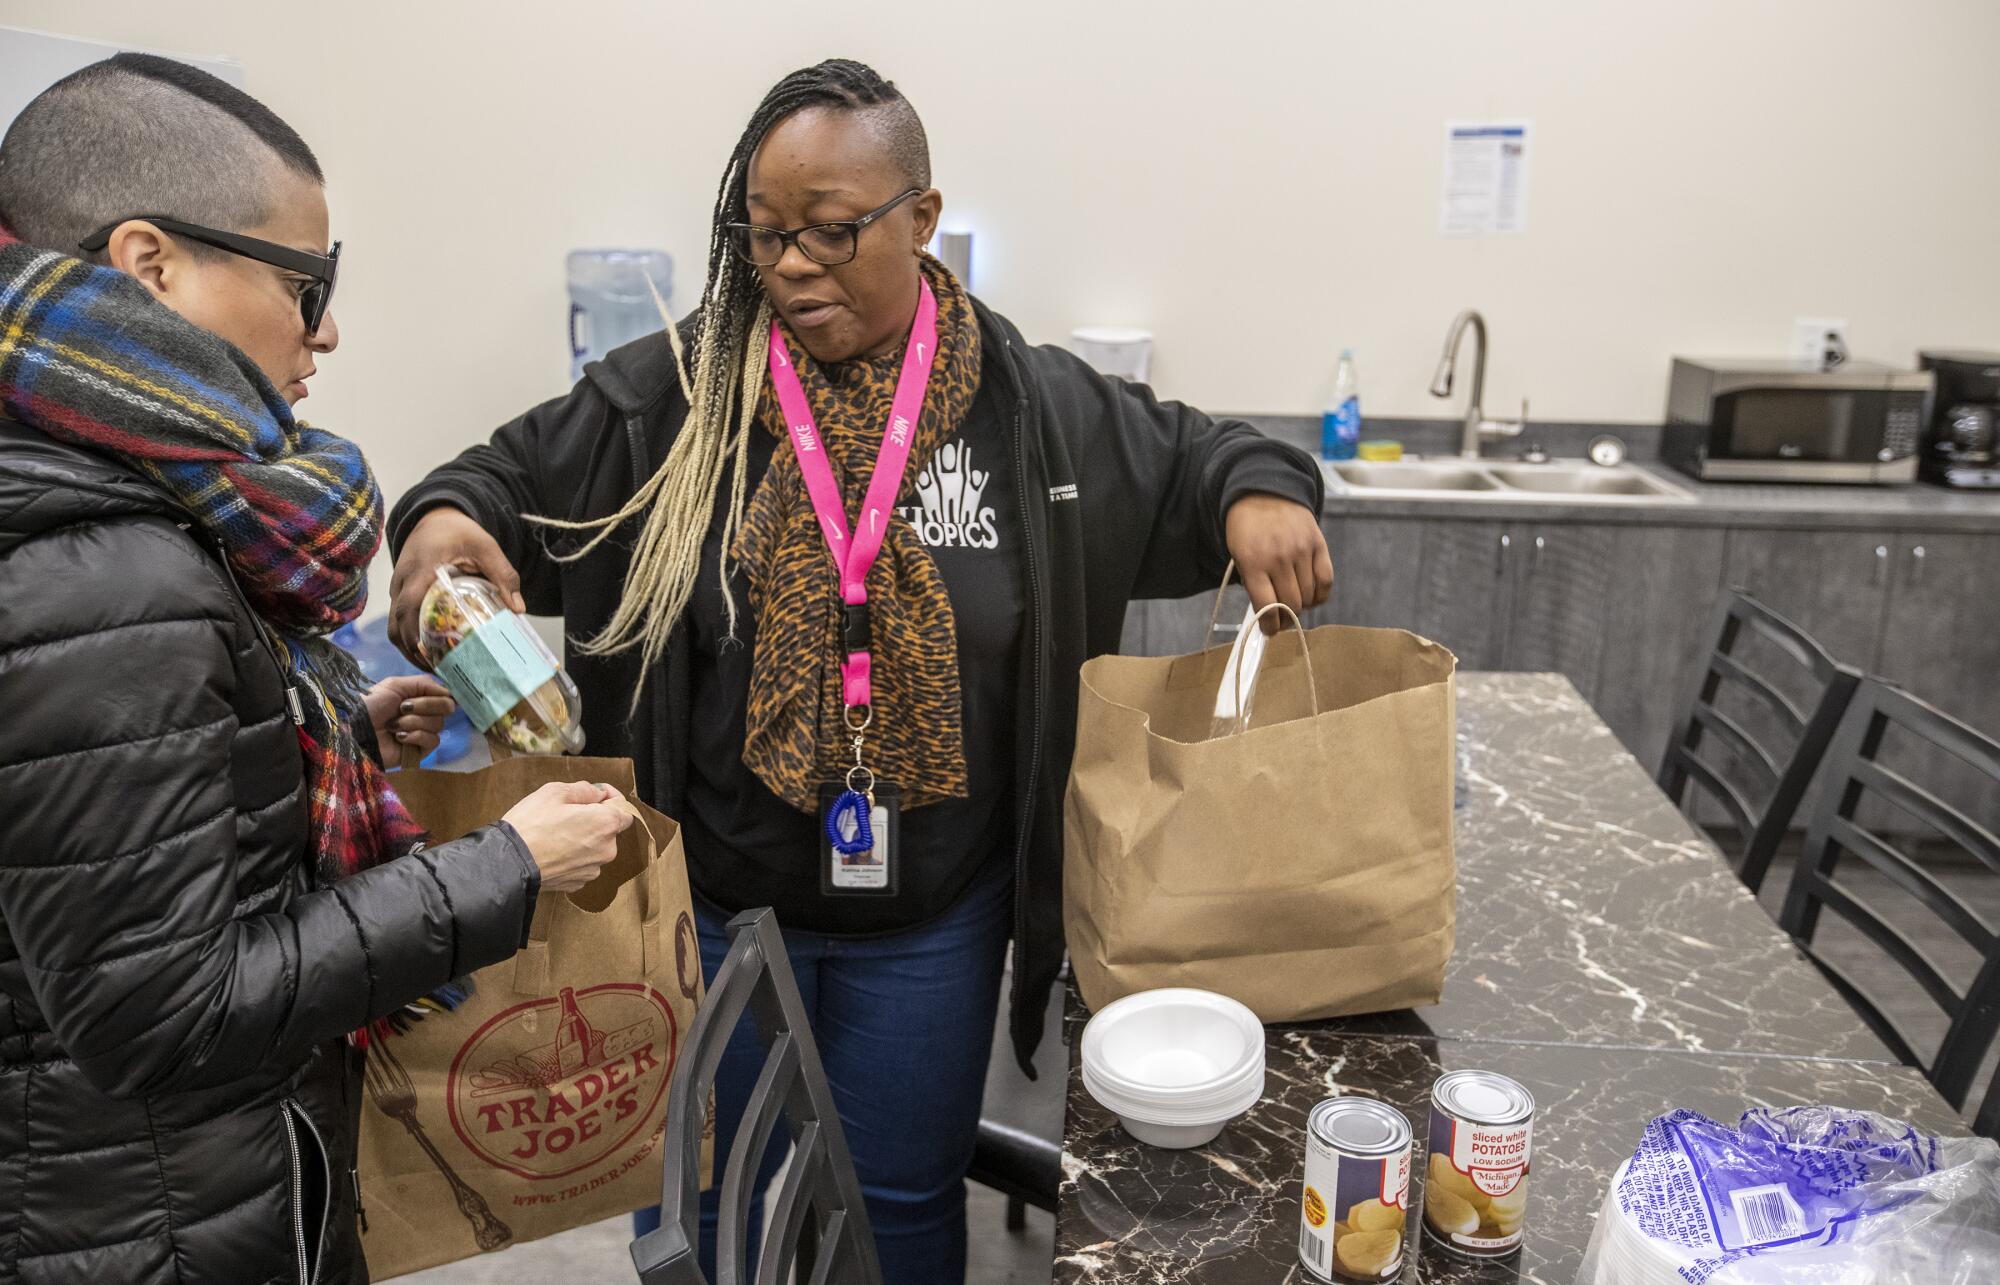 Outreach workers Denise Ramirez, left, and Katrina Johnson pack food to hand out to homeless people as part of their outreach program in Los Angeles.